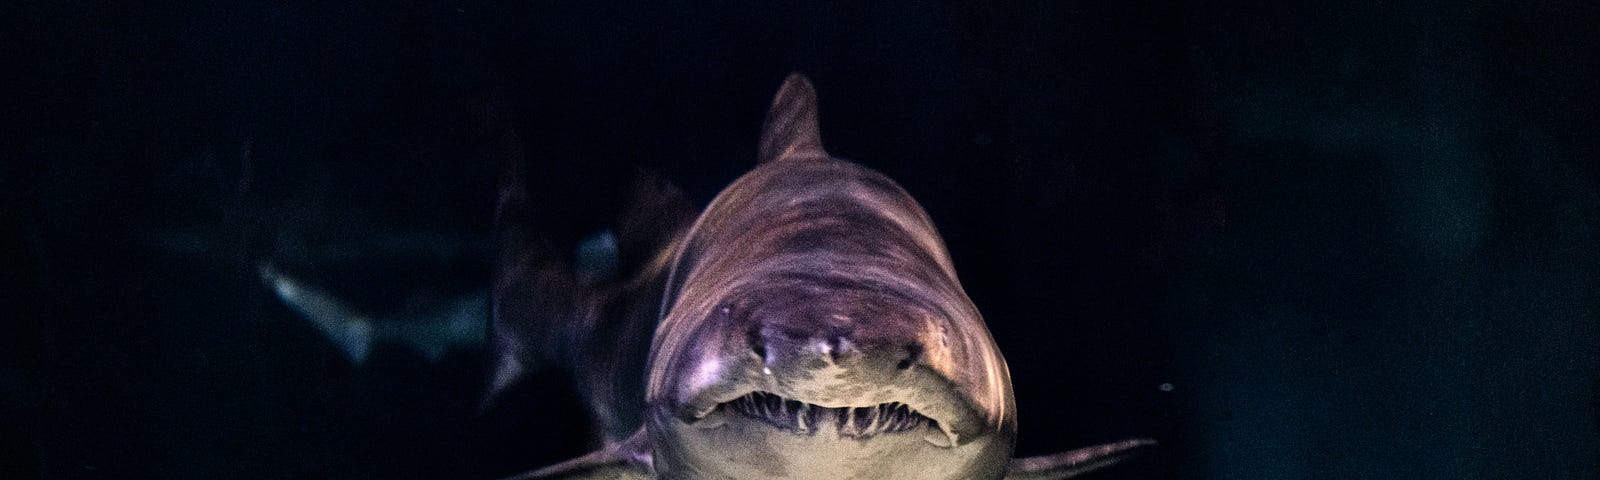 From the murky depths of the ocean, a shark stares menacingly.